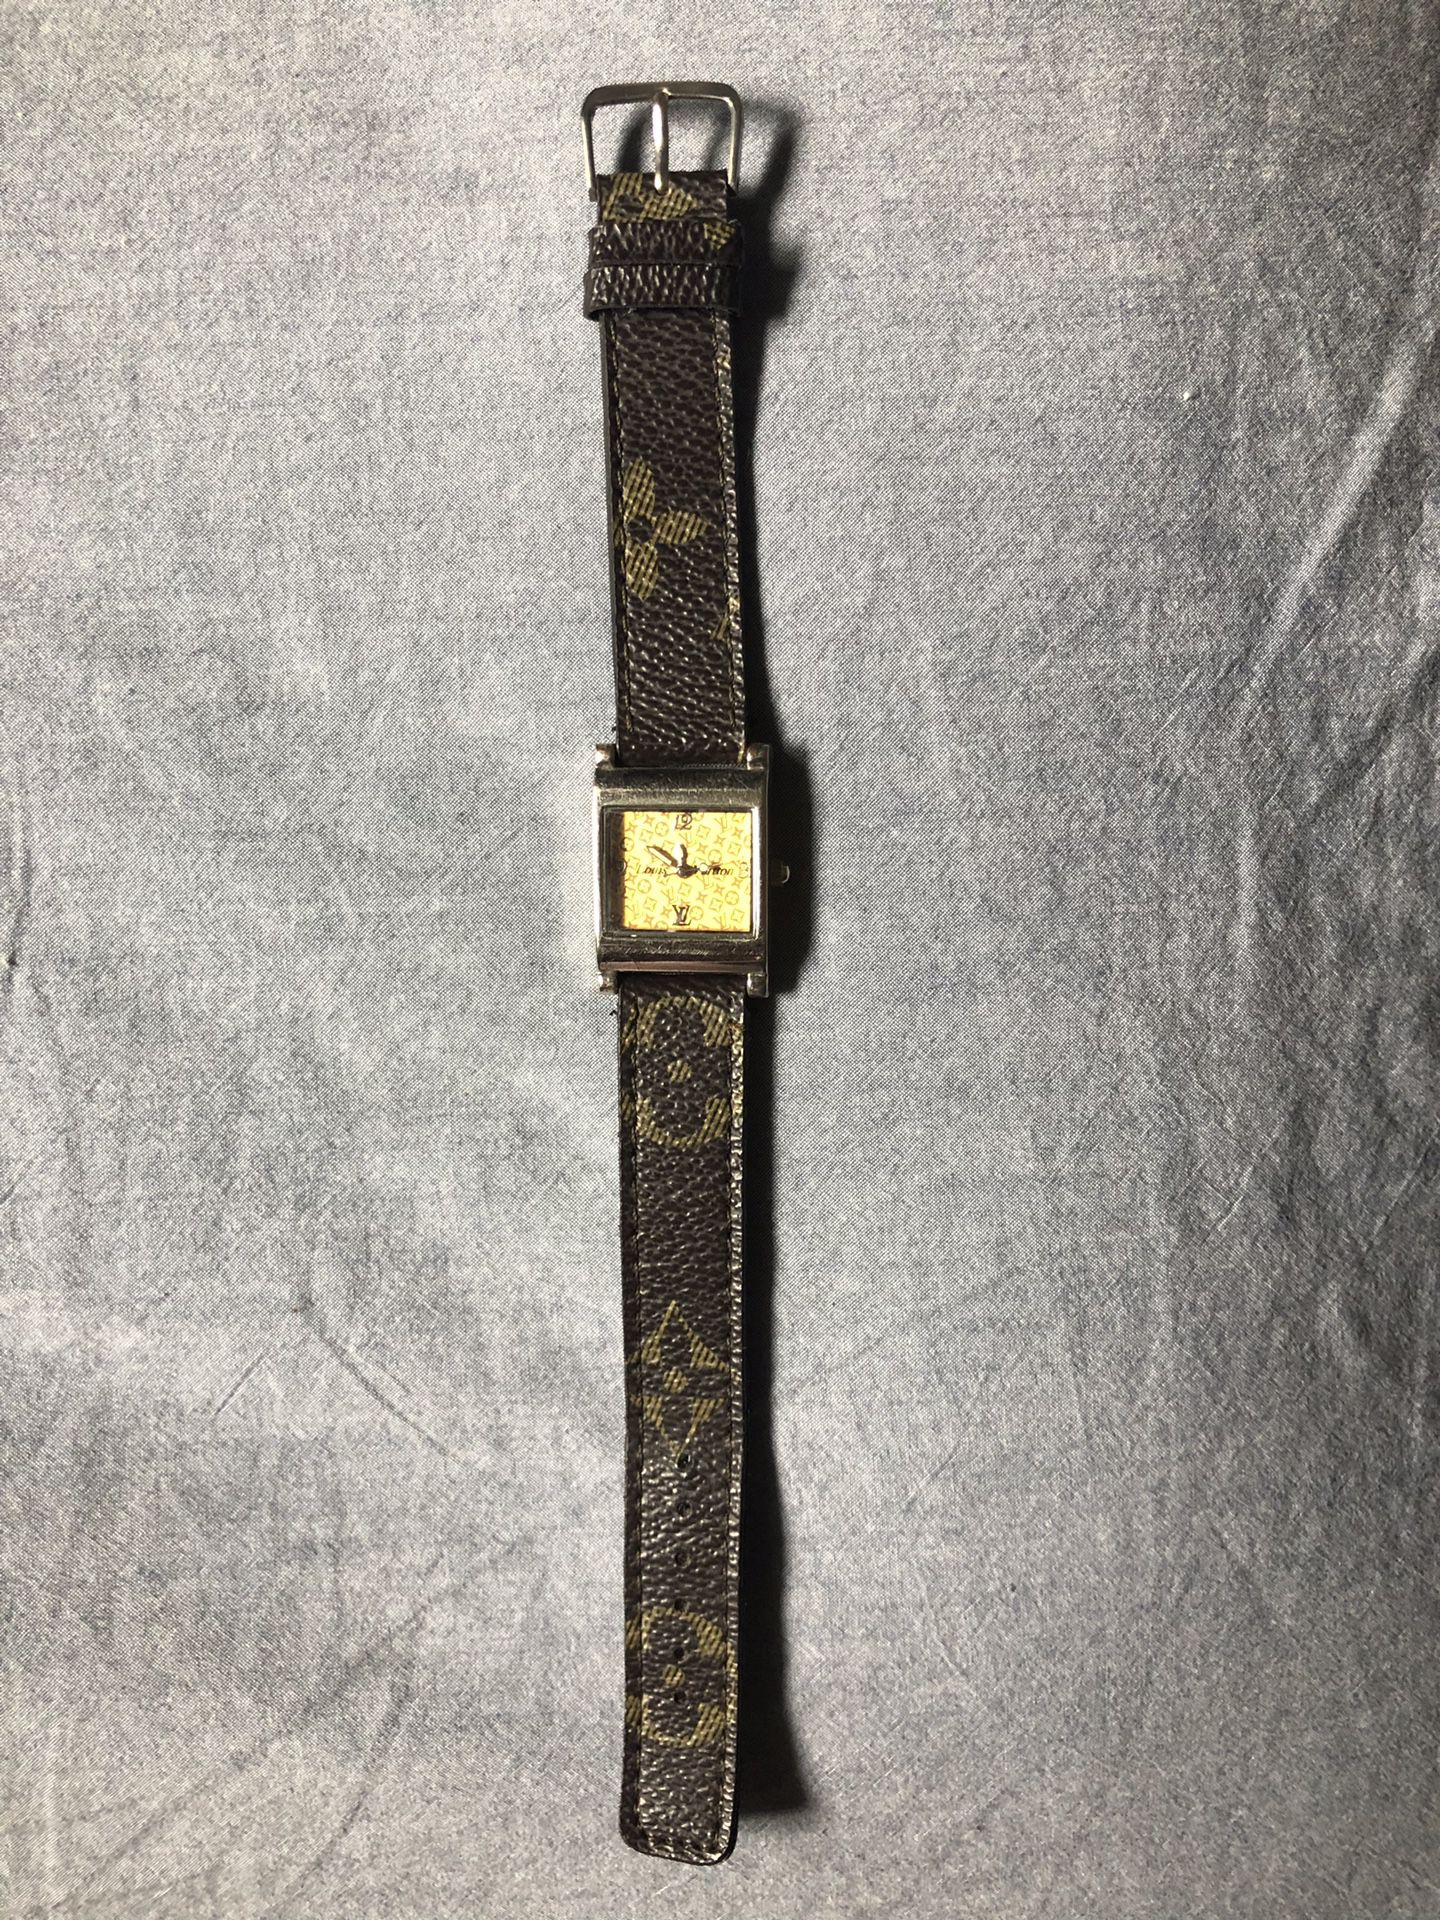 LV Premium Collection Ladies Watches » Buy online from ShopnSafe